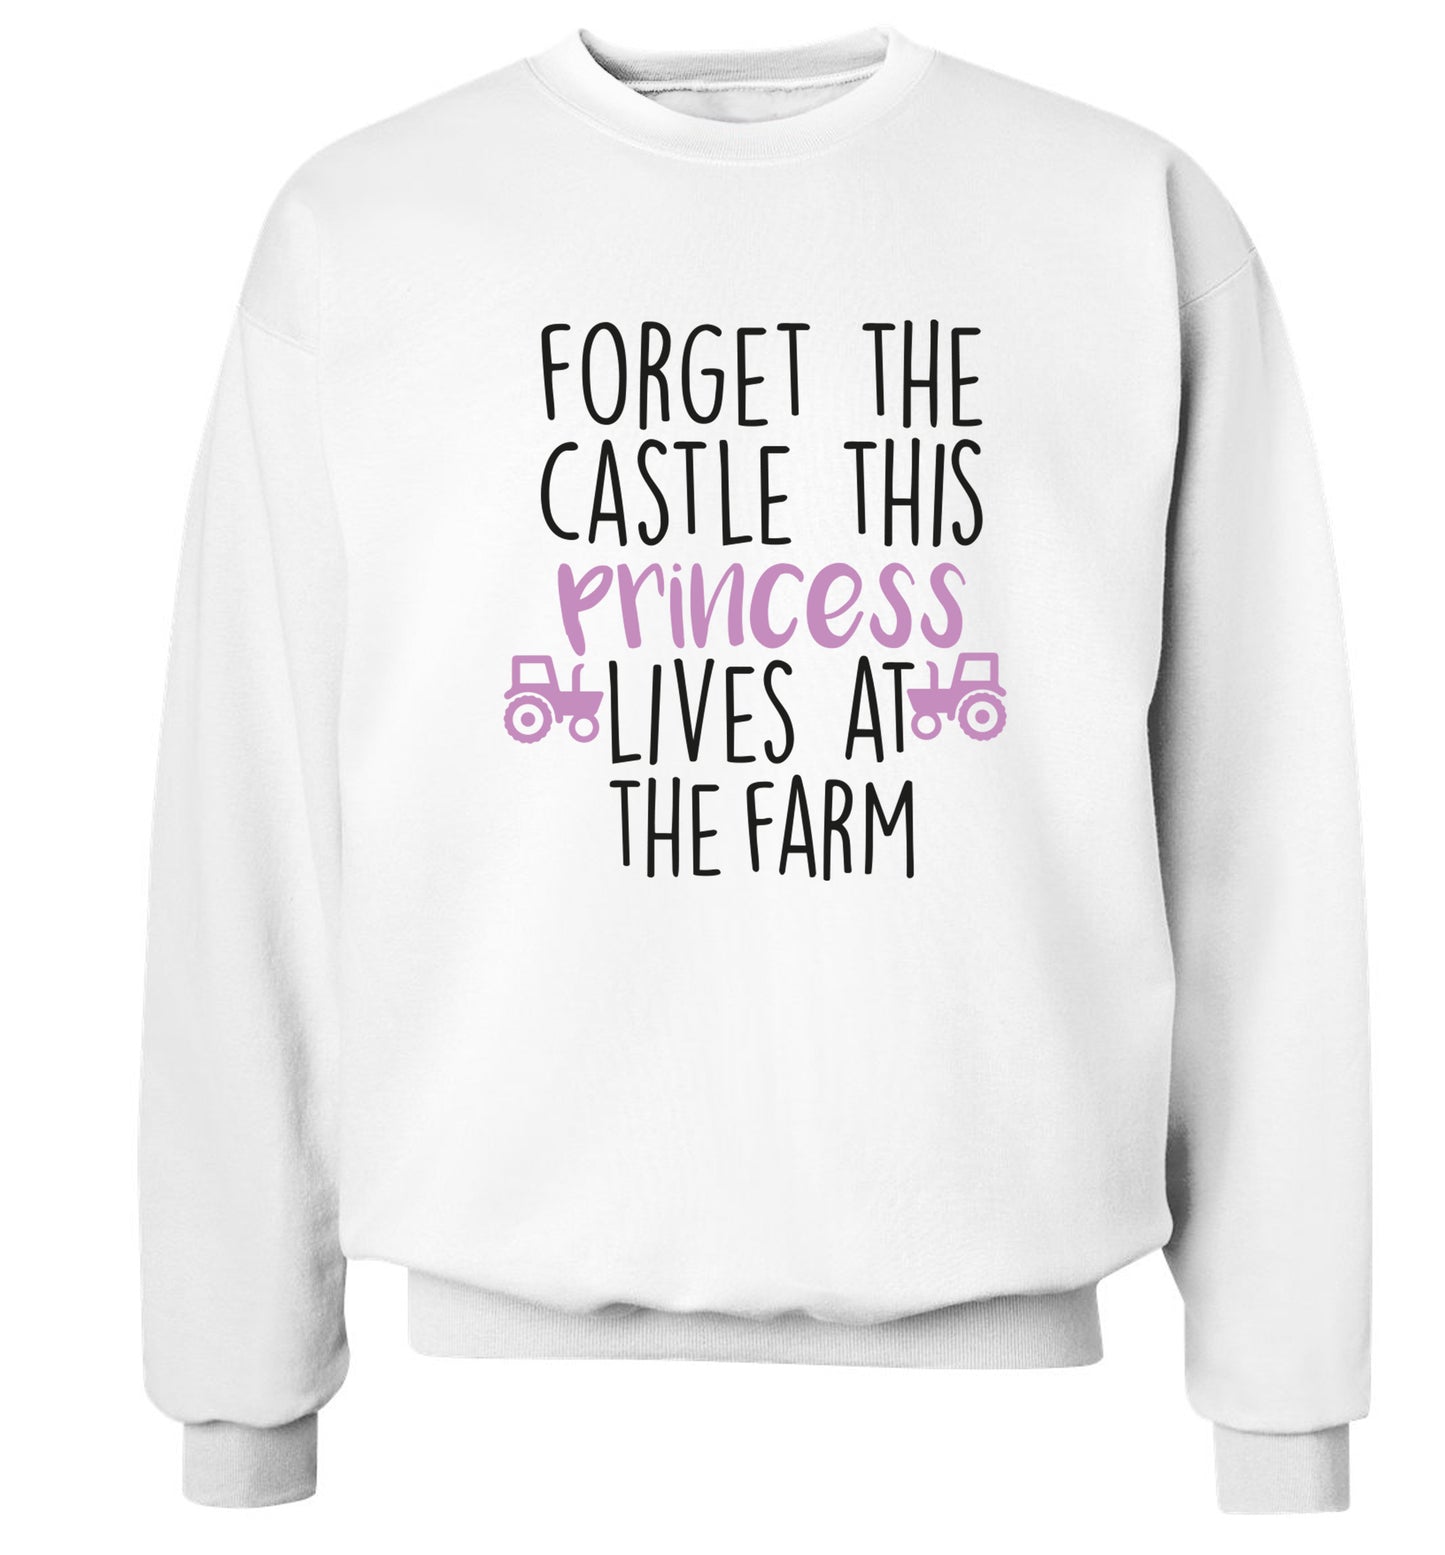 Forget the castle this princess lives at the farm Adult's unisex white Sweater 2XL